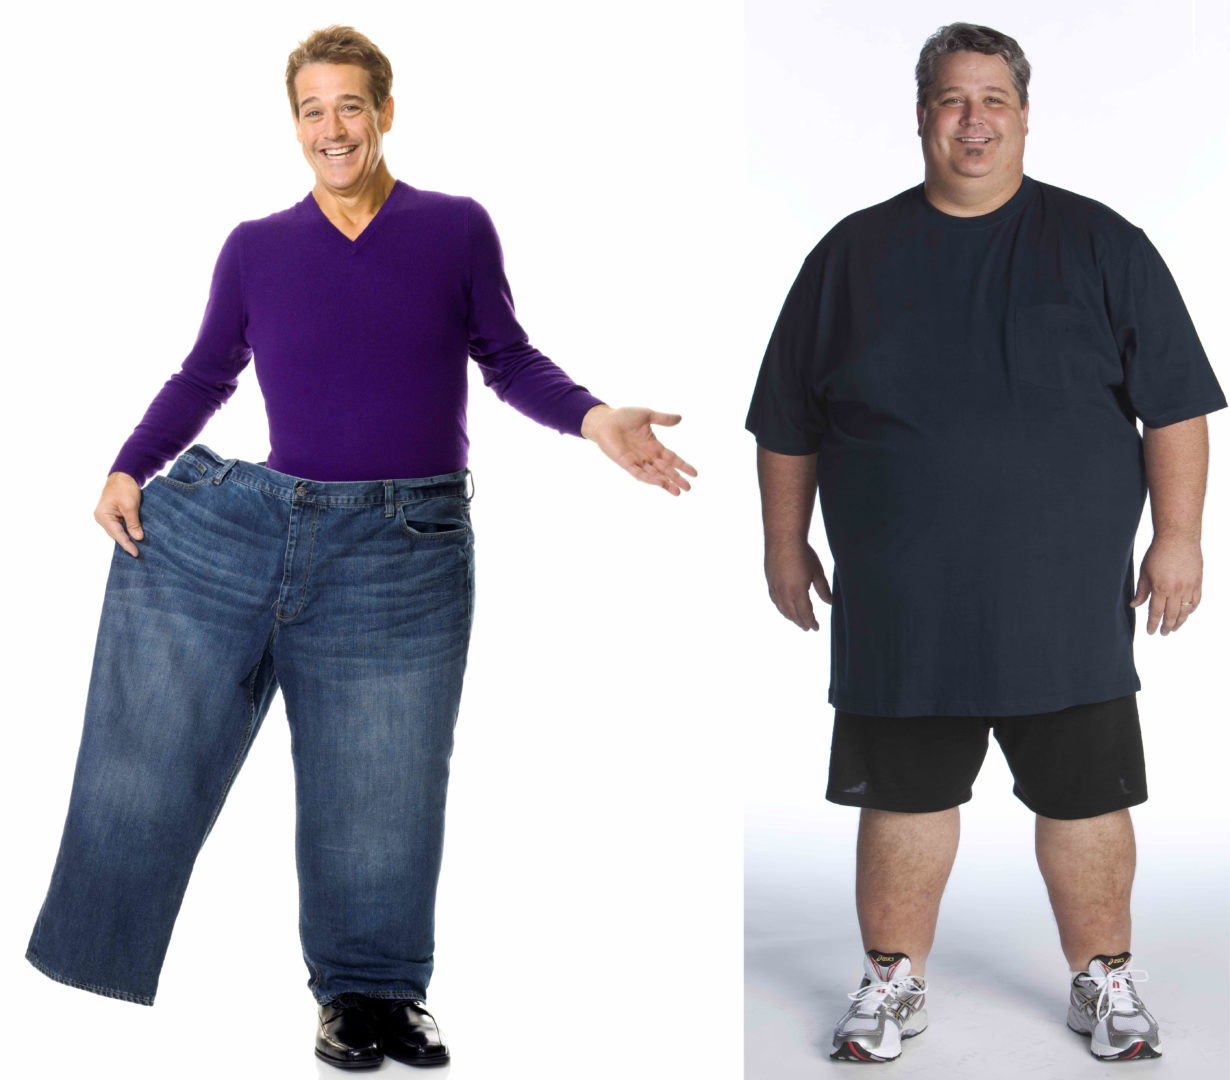 The Biggest Loser – Extreme Weight Loss